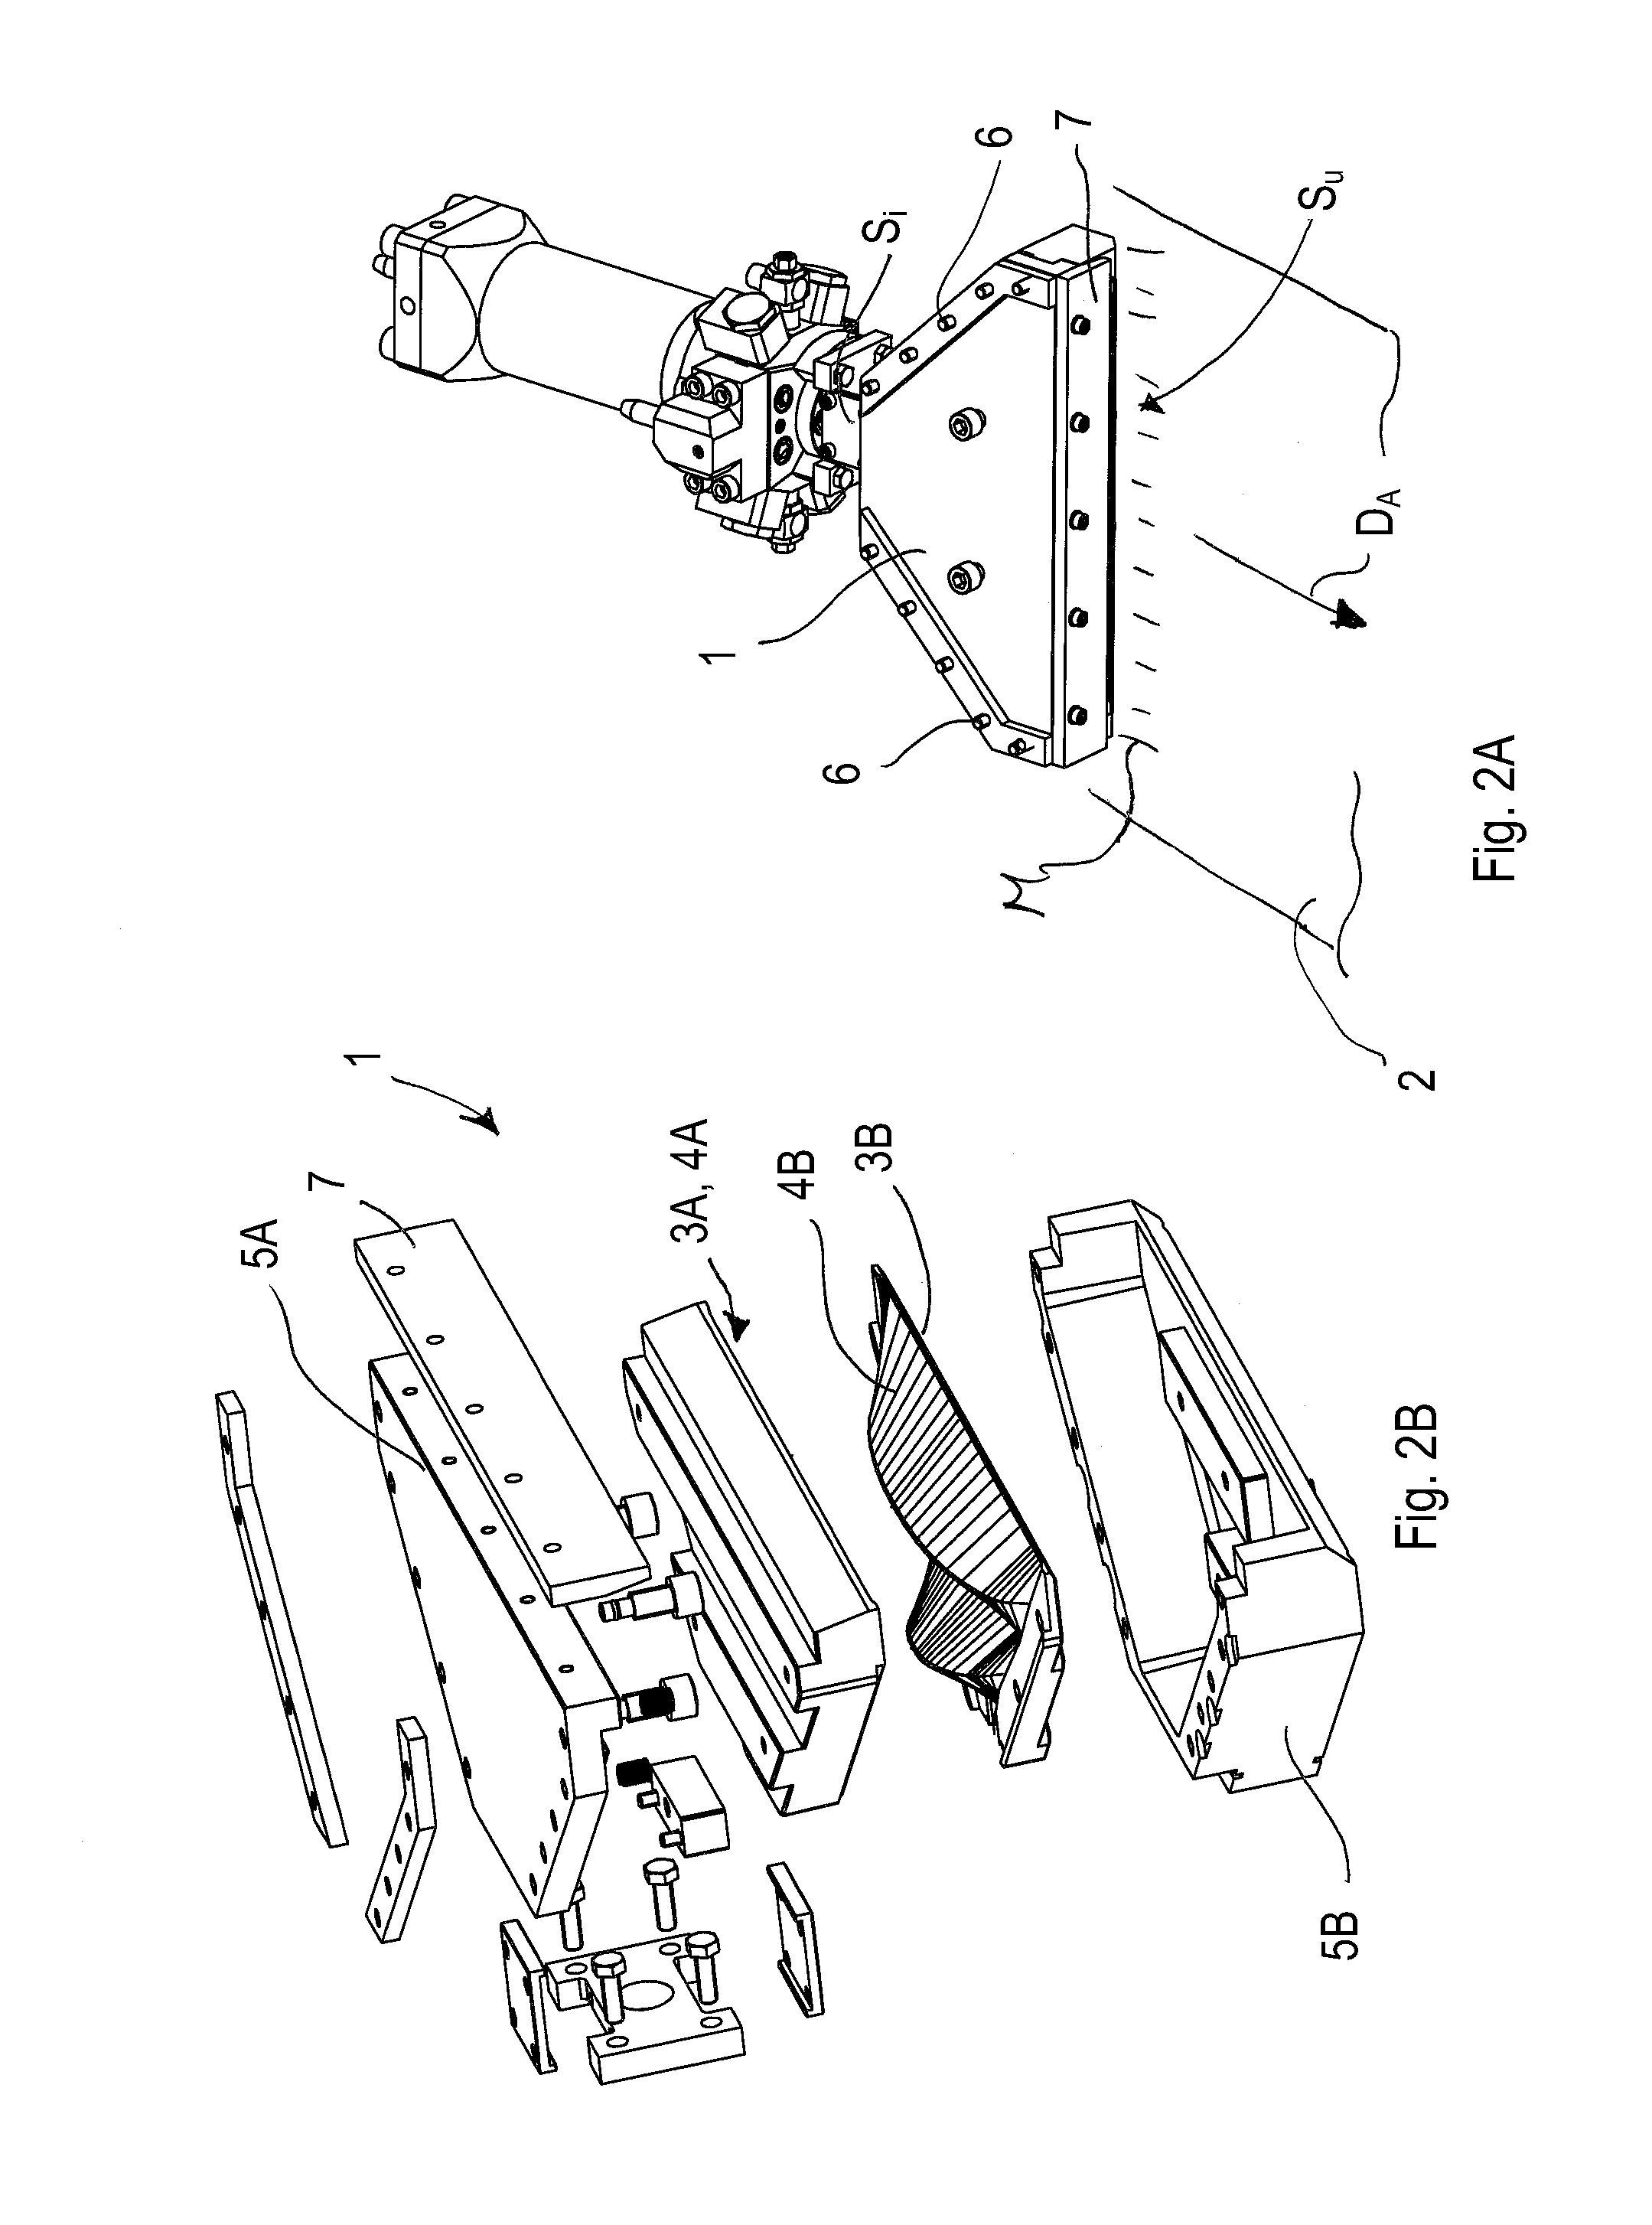 Method, device and apparatus for dispensing polyurethane mixtures